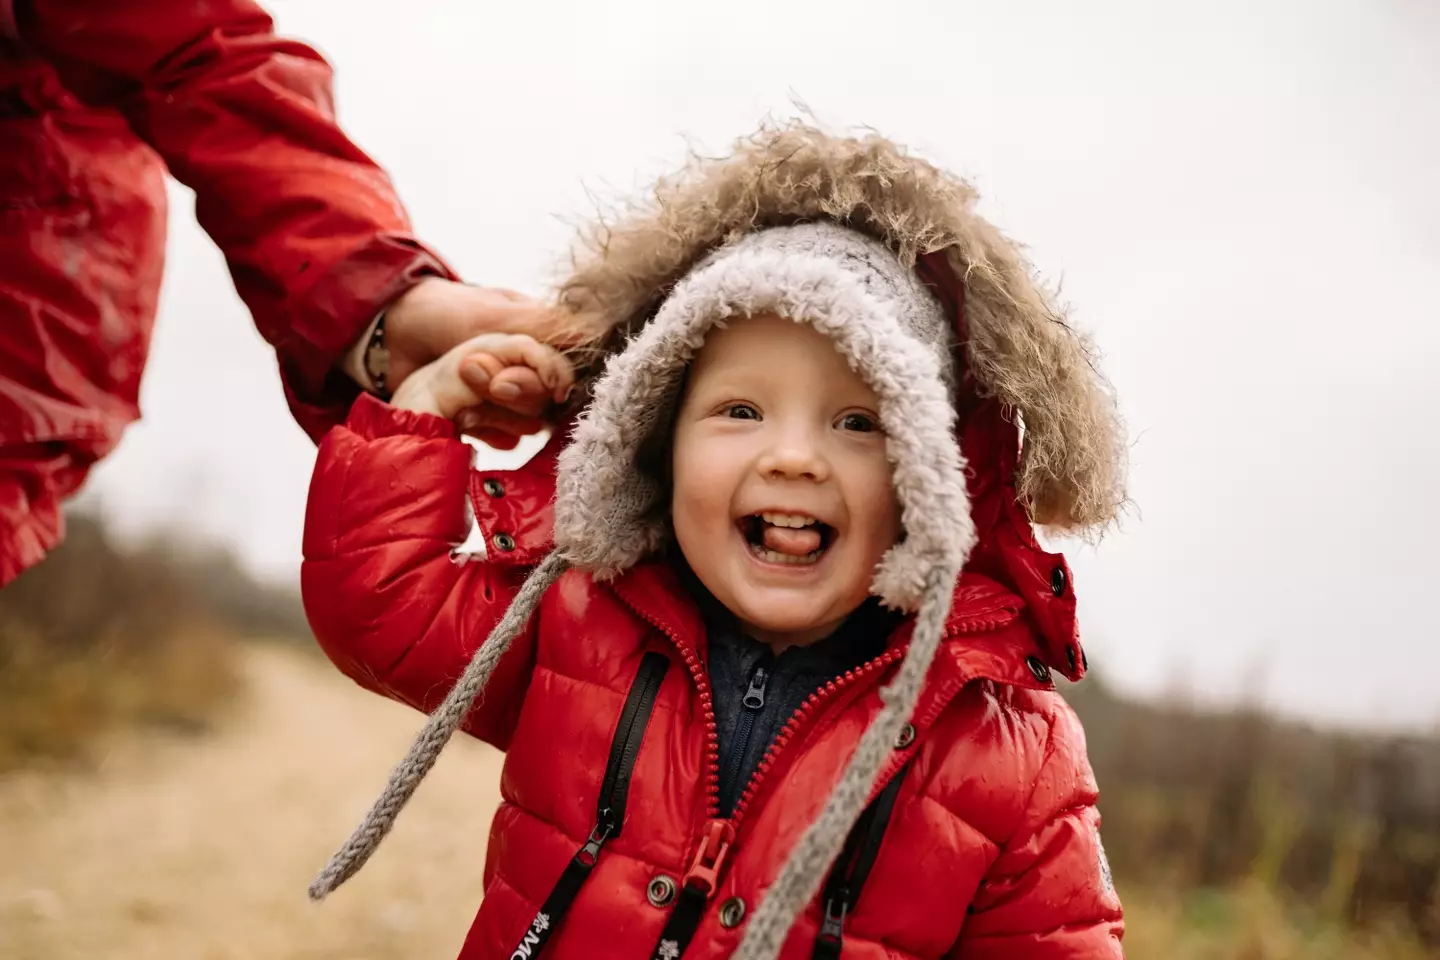 'Bulky jackets will compress' meaning your child won't be safe.